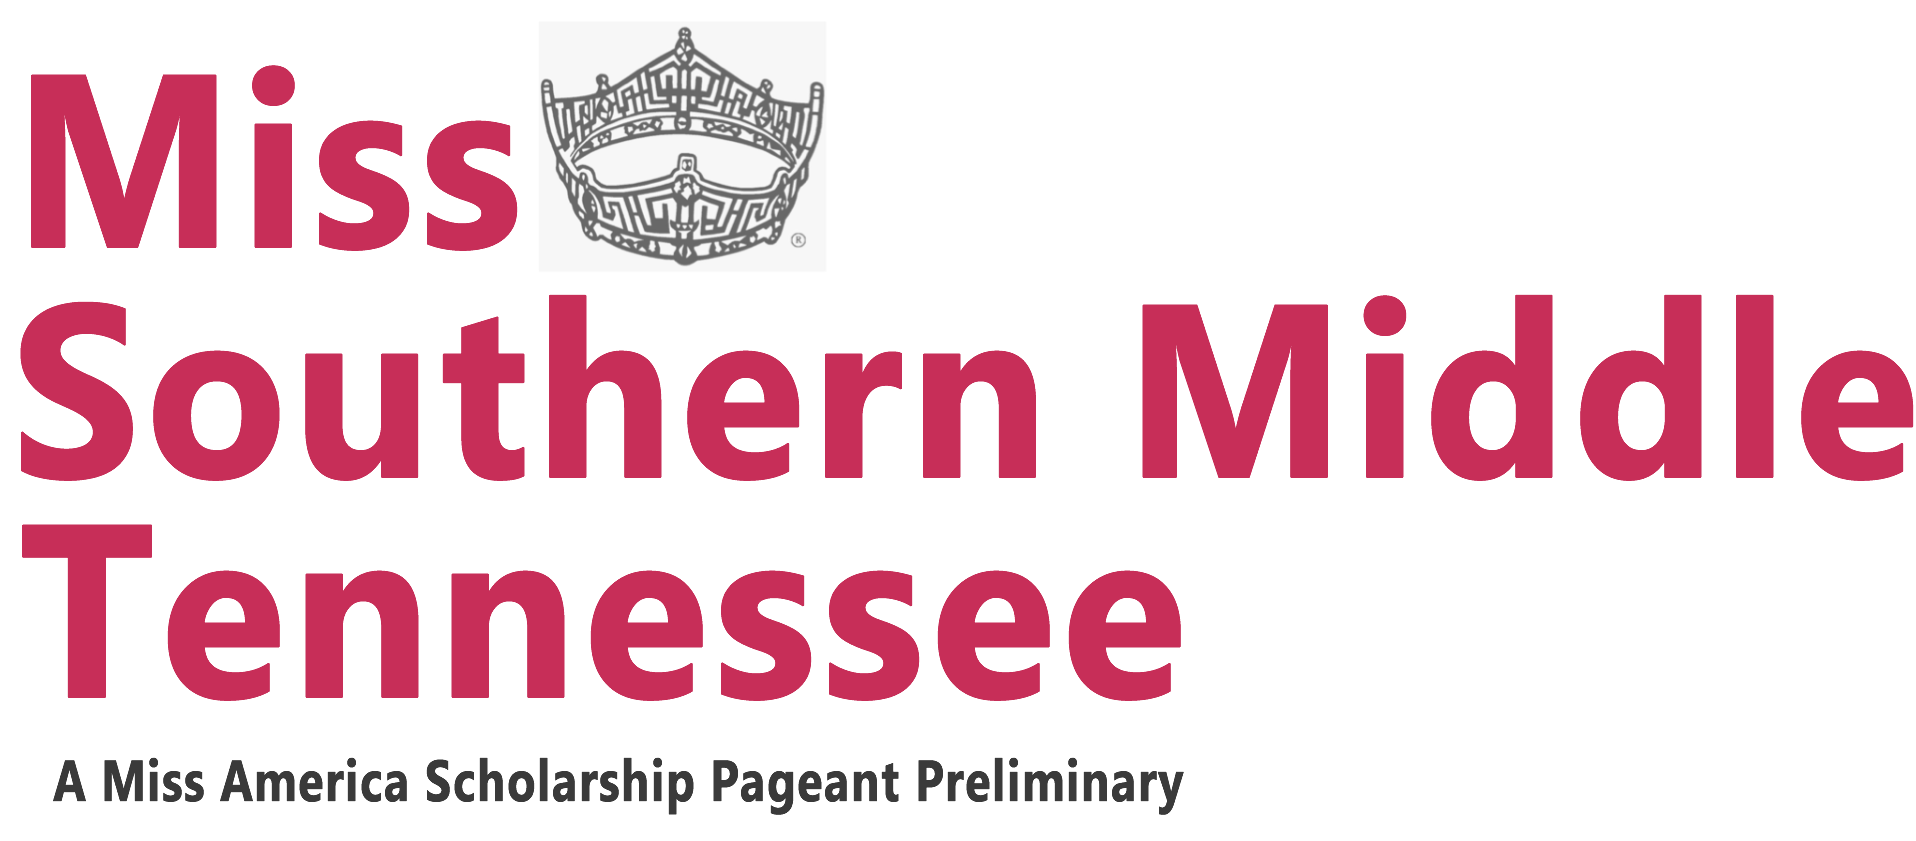 Miss Southern Middle Tennessee Pageant